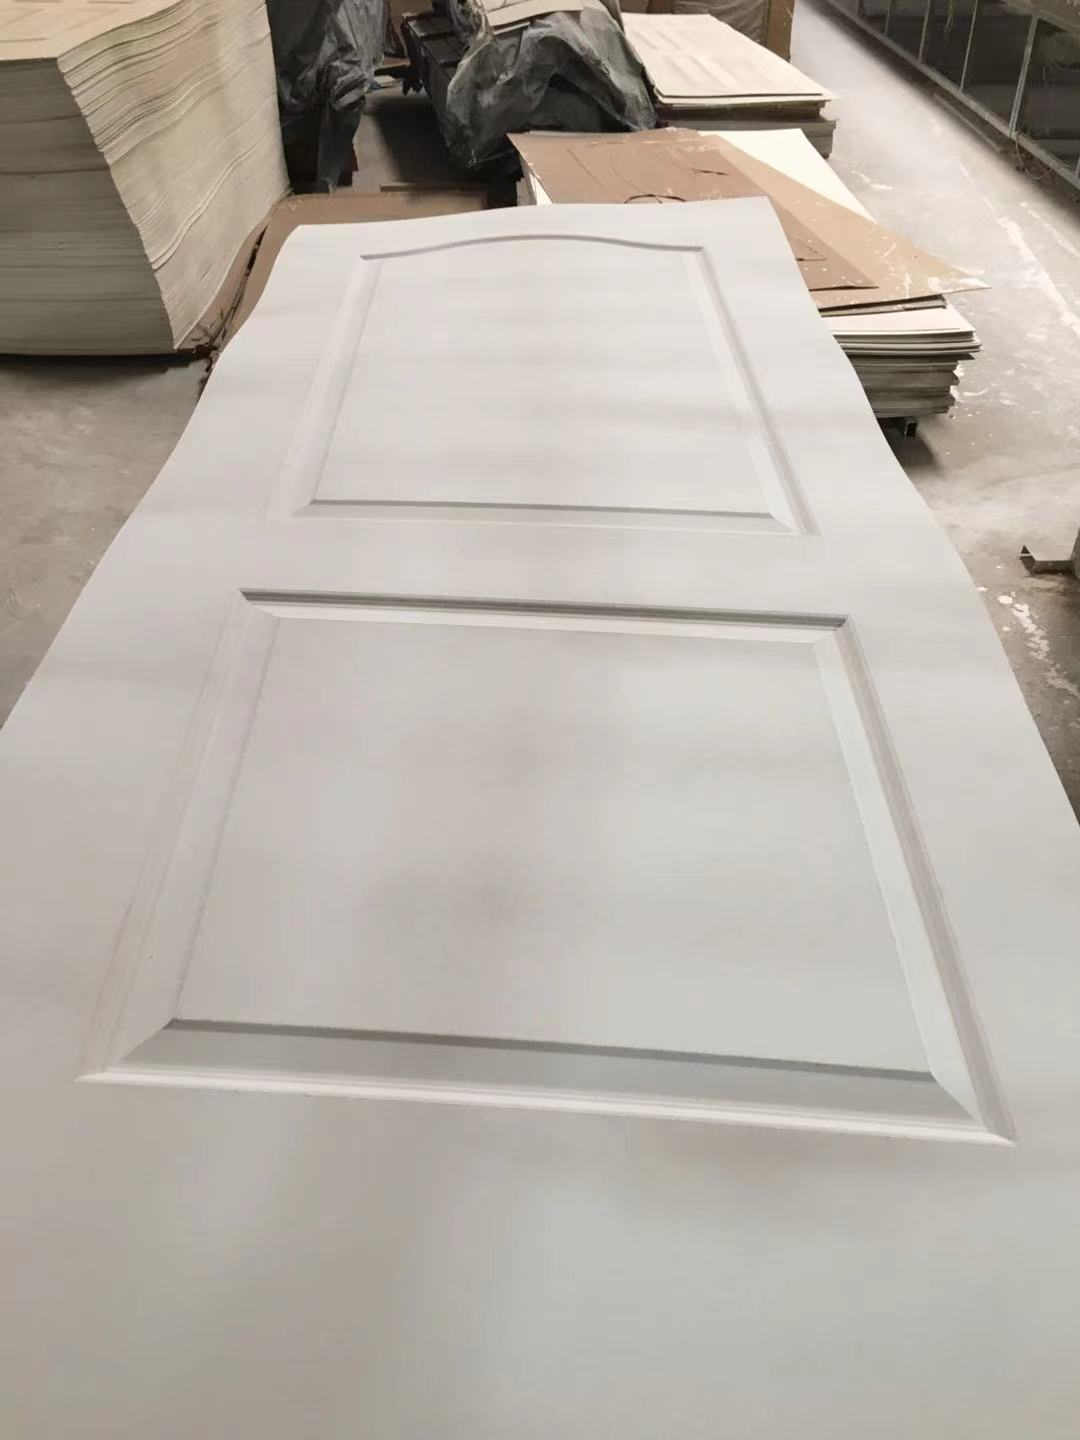 HDF Moulded Door Skin with White Primer Painting